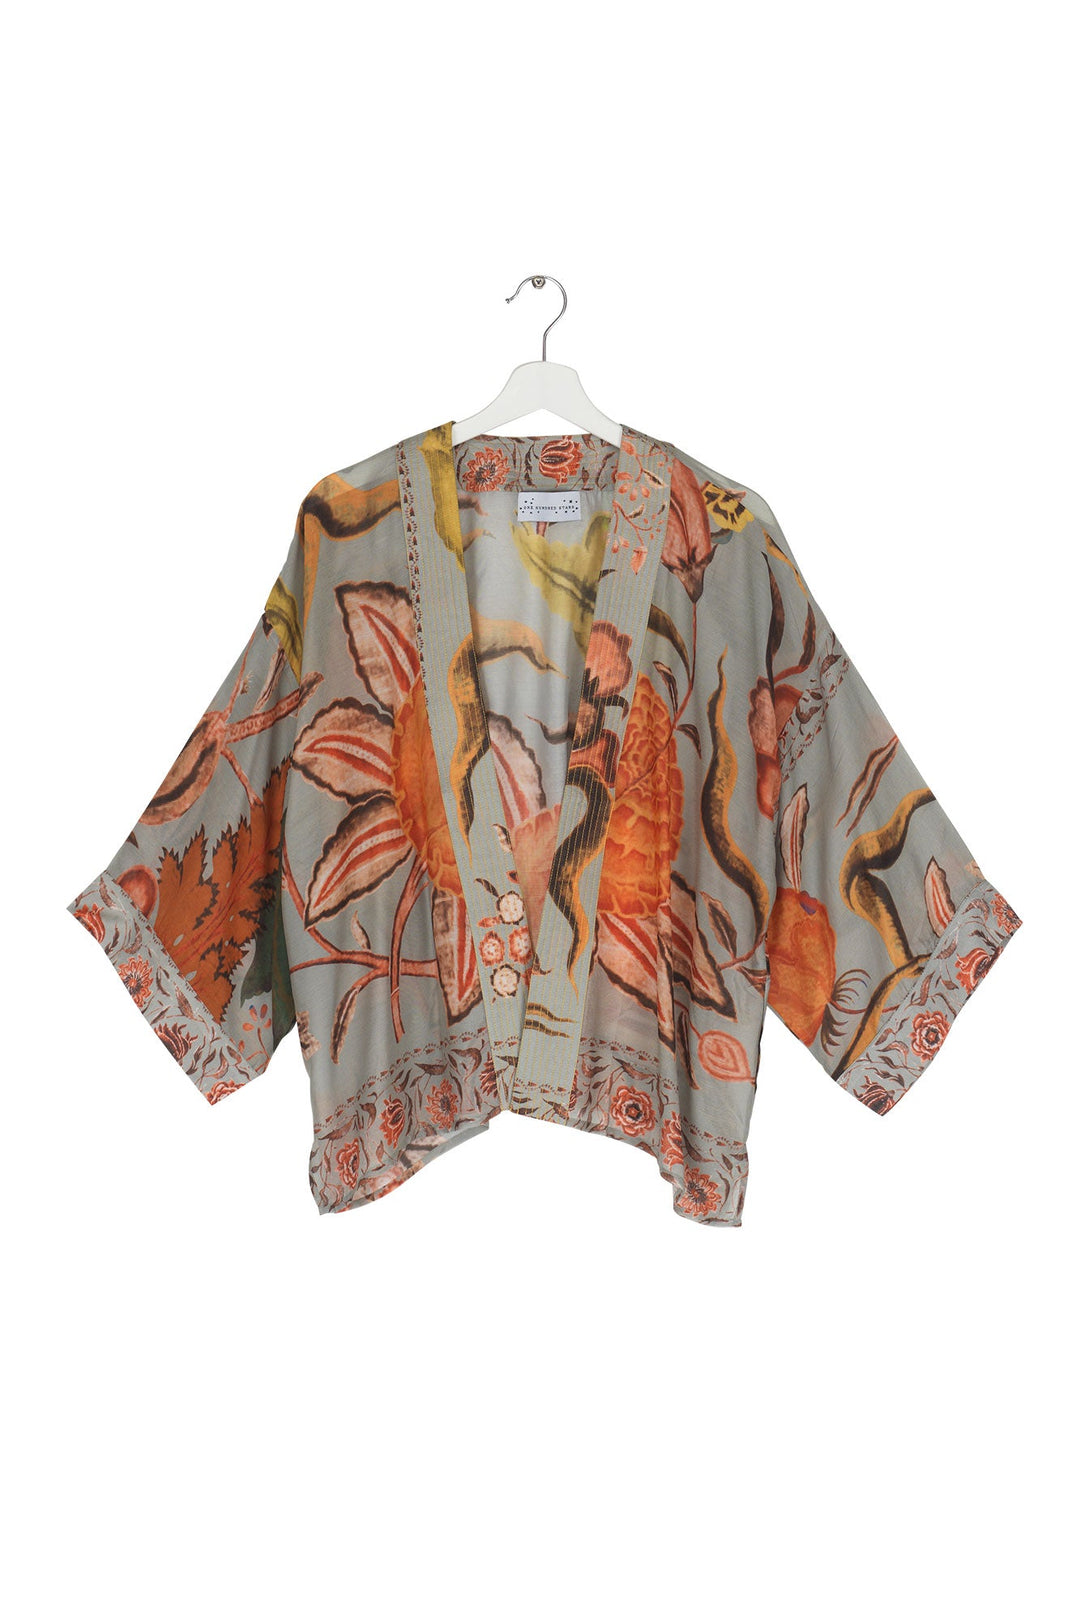 Women's short kimono in green with floral joy print by One Hundred Stars